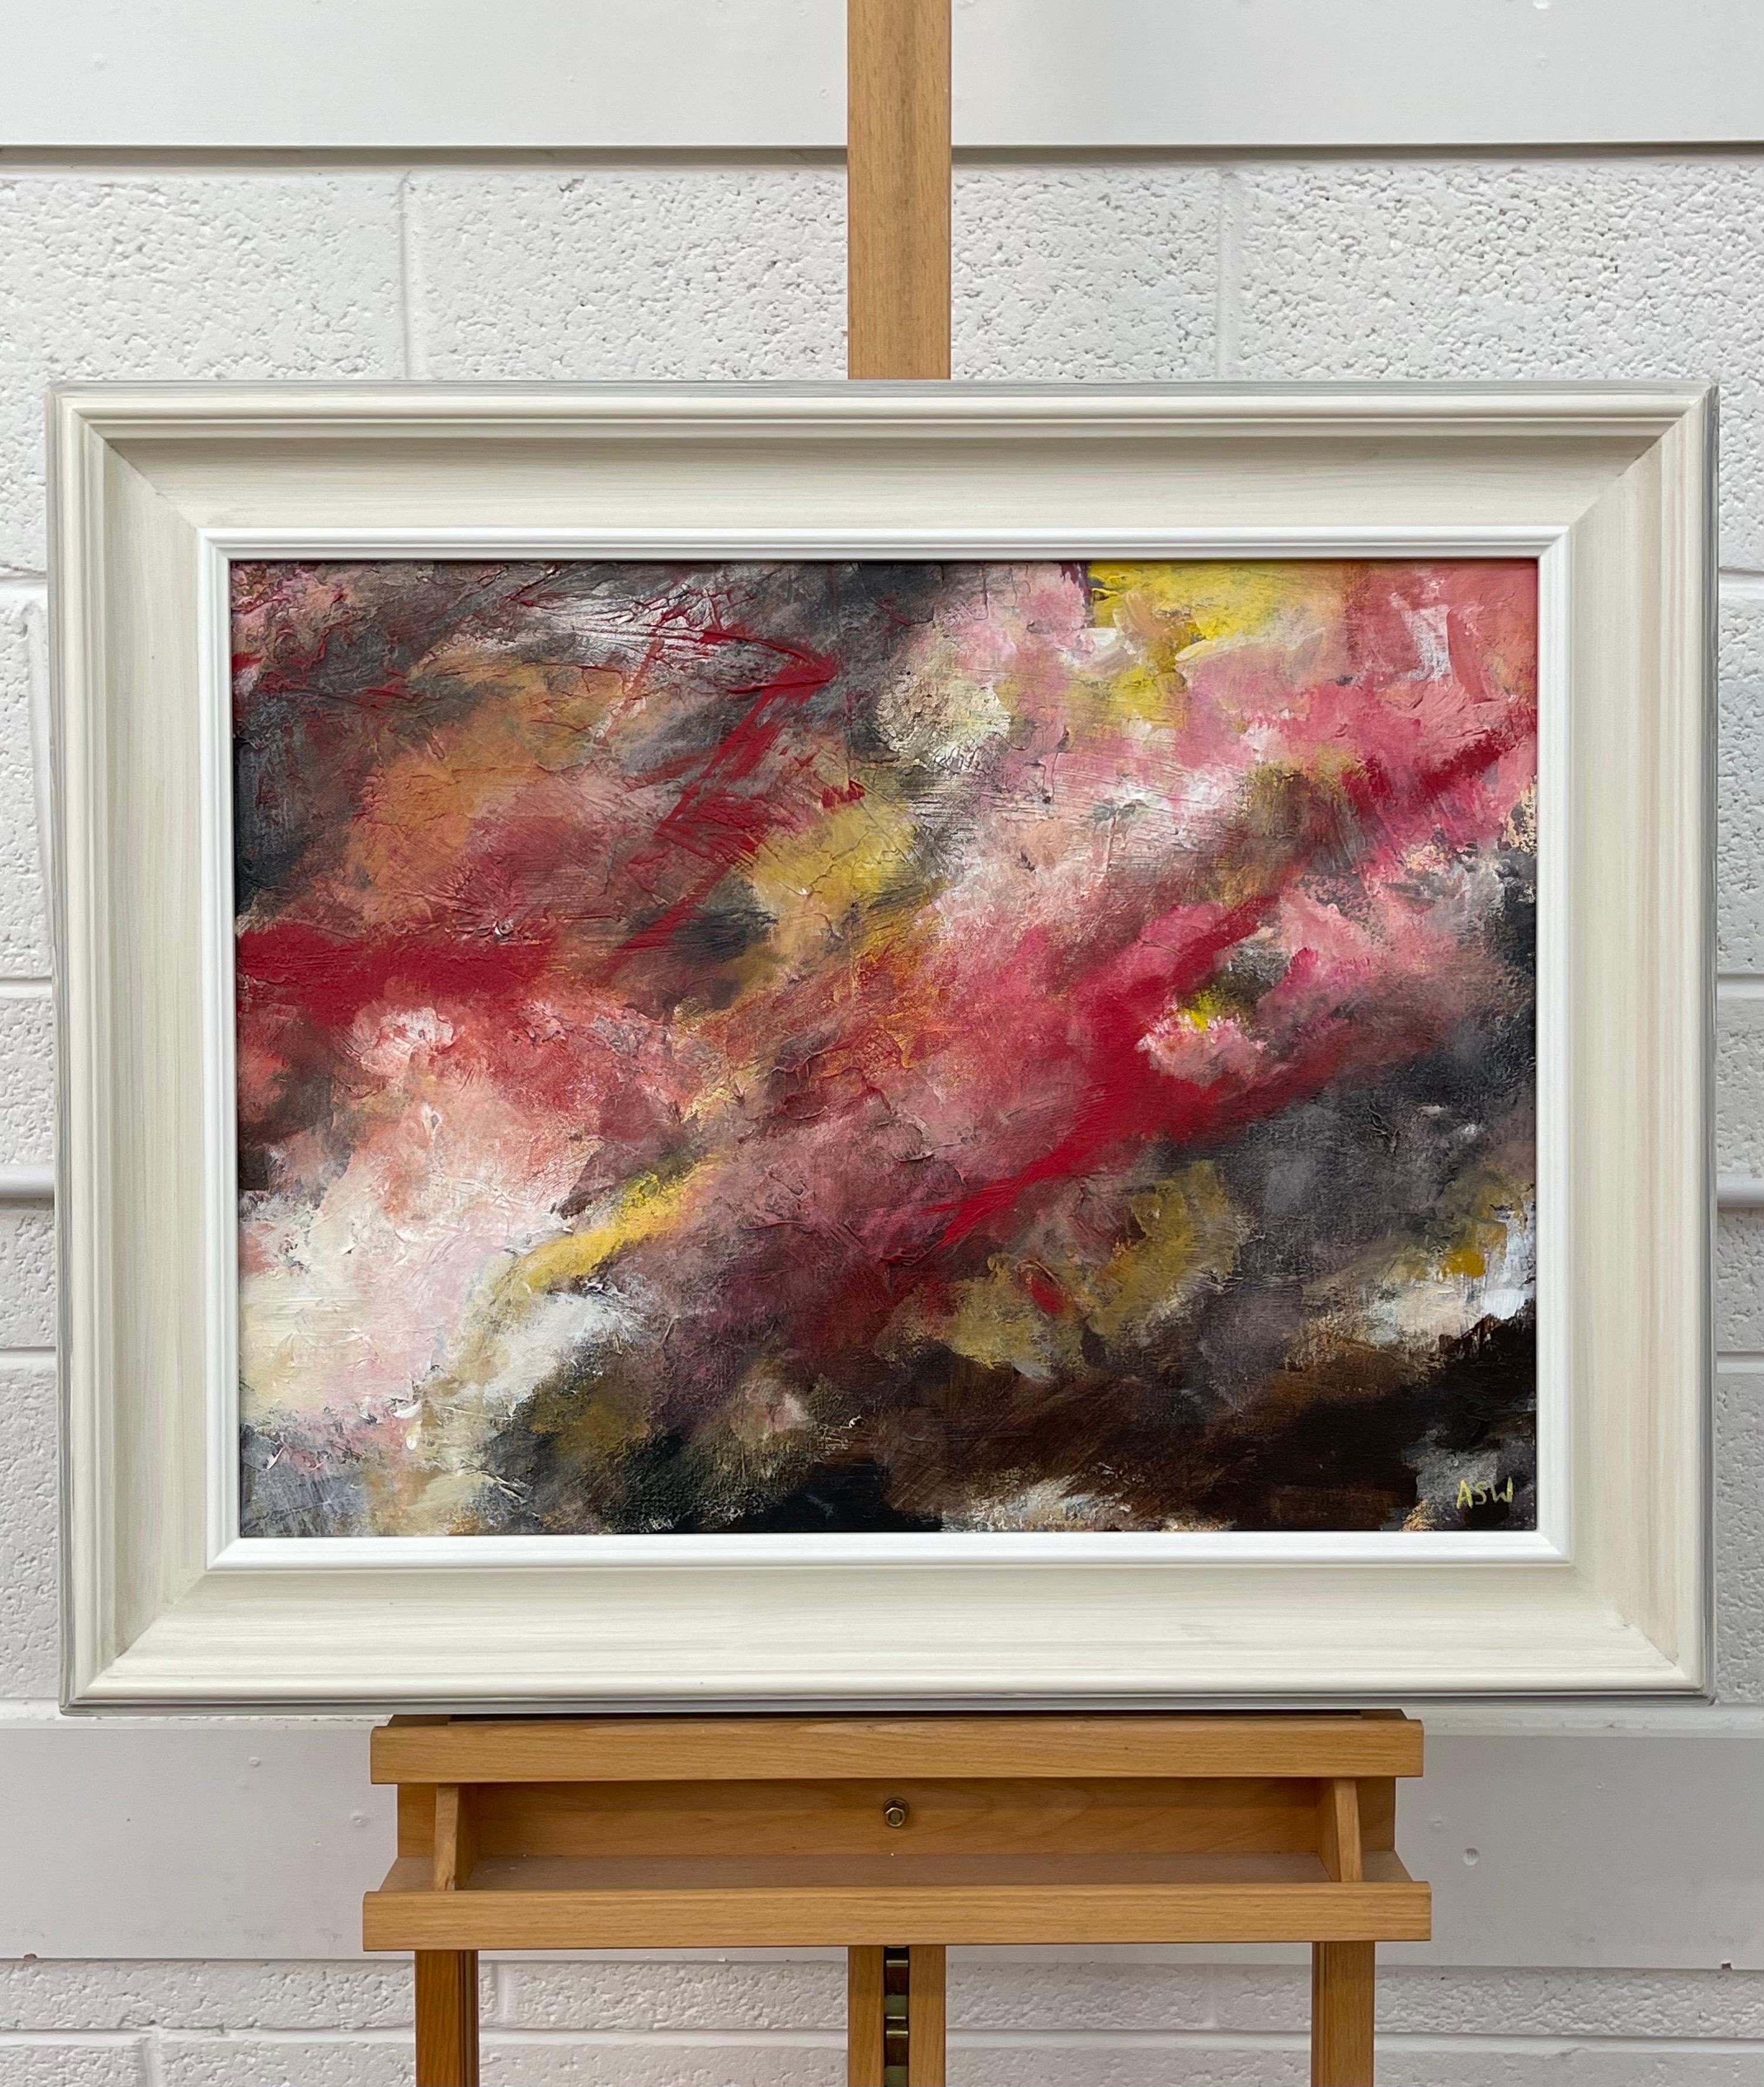 Abstract Landscape using Red, Black and Yellow by Contemporary British Artist - Brown Abstract Painting by Angela Wakefield